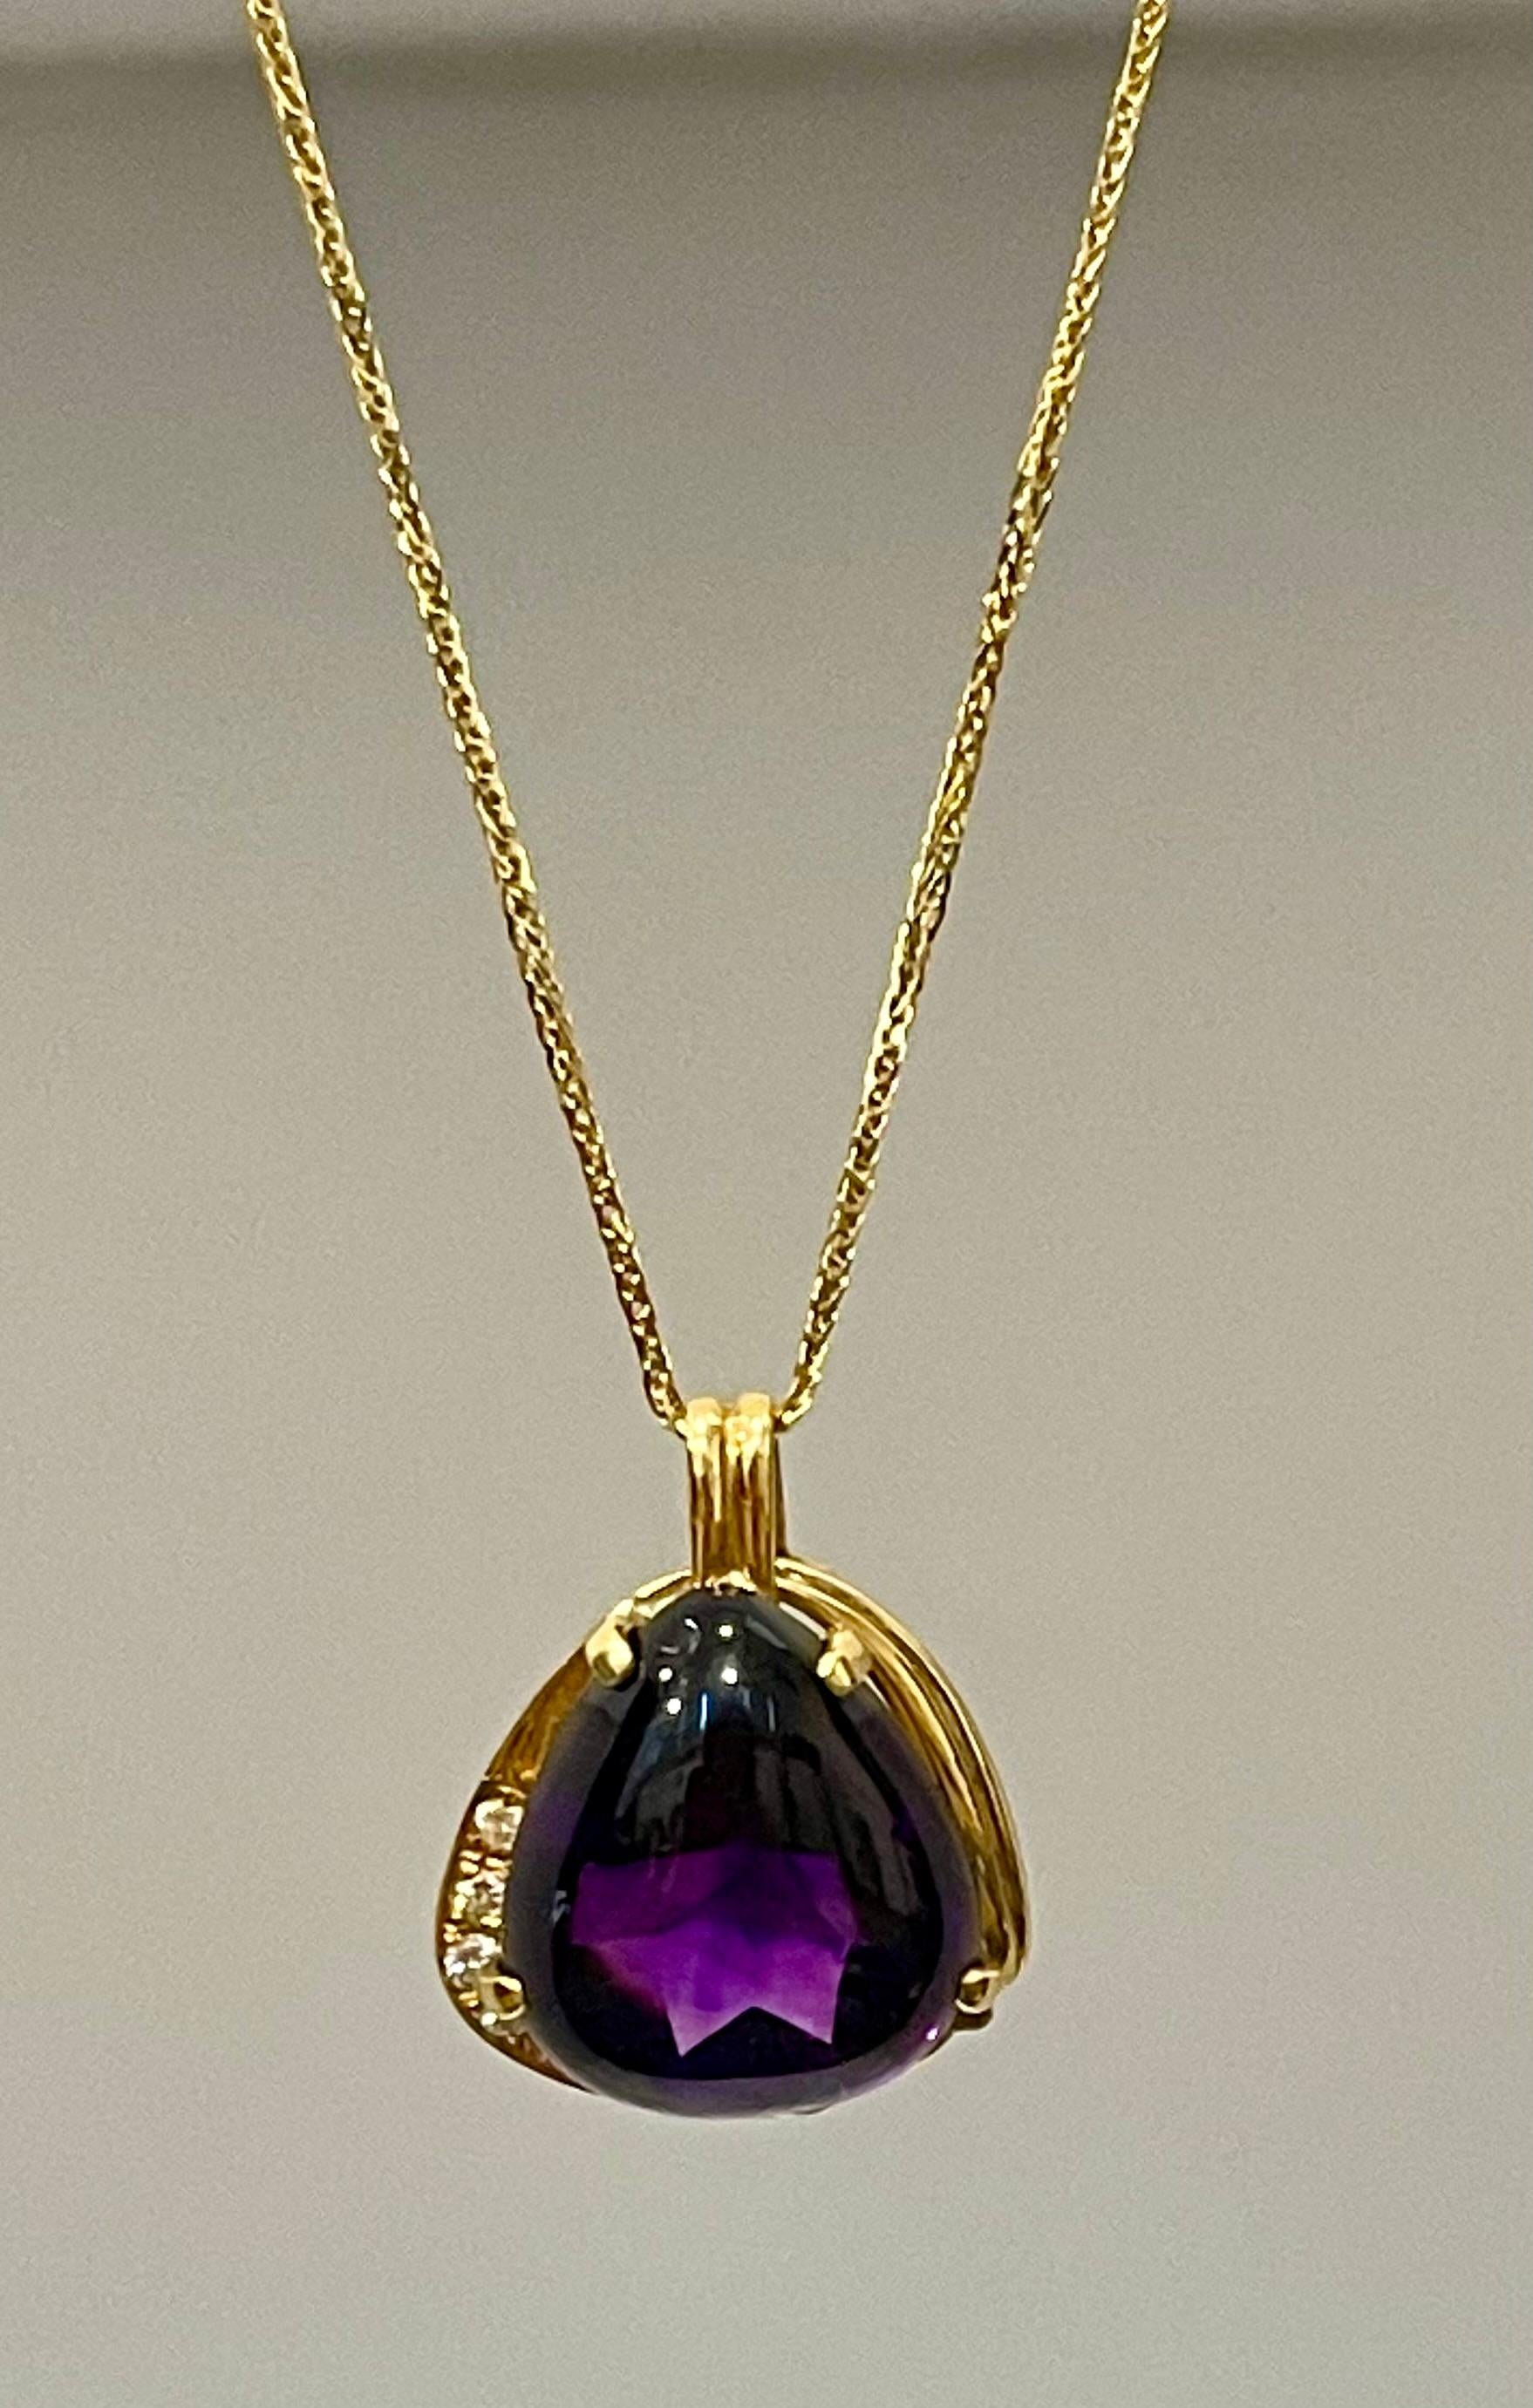 10 Carat Tear Drop Amethyst and Diamonds Pendent Necklace 18 Karat Yellow Gold For Sale 8